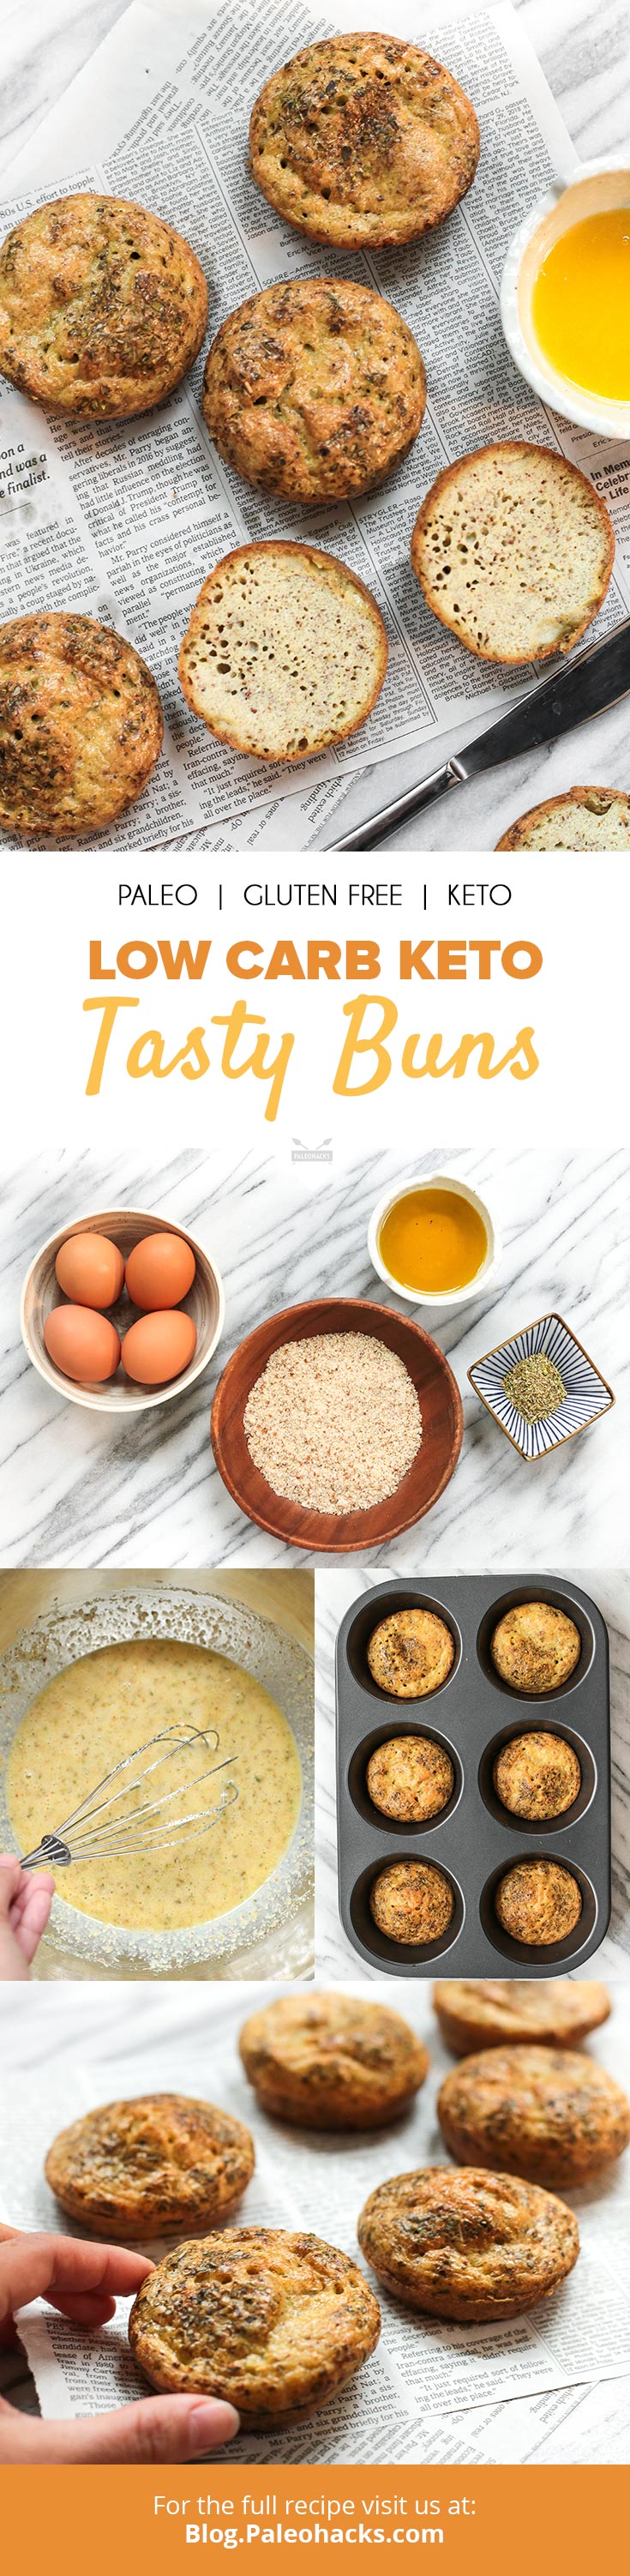 Toast up these keto buns for a fluffy snack or hearty side dish. They’re low-carb, full of protein, and ready in just 30 minutes.